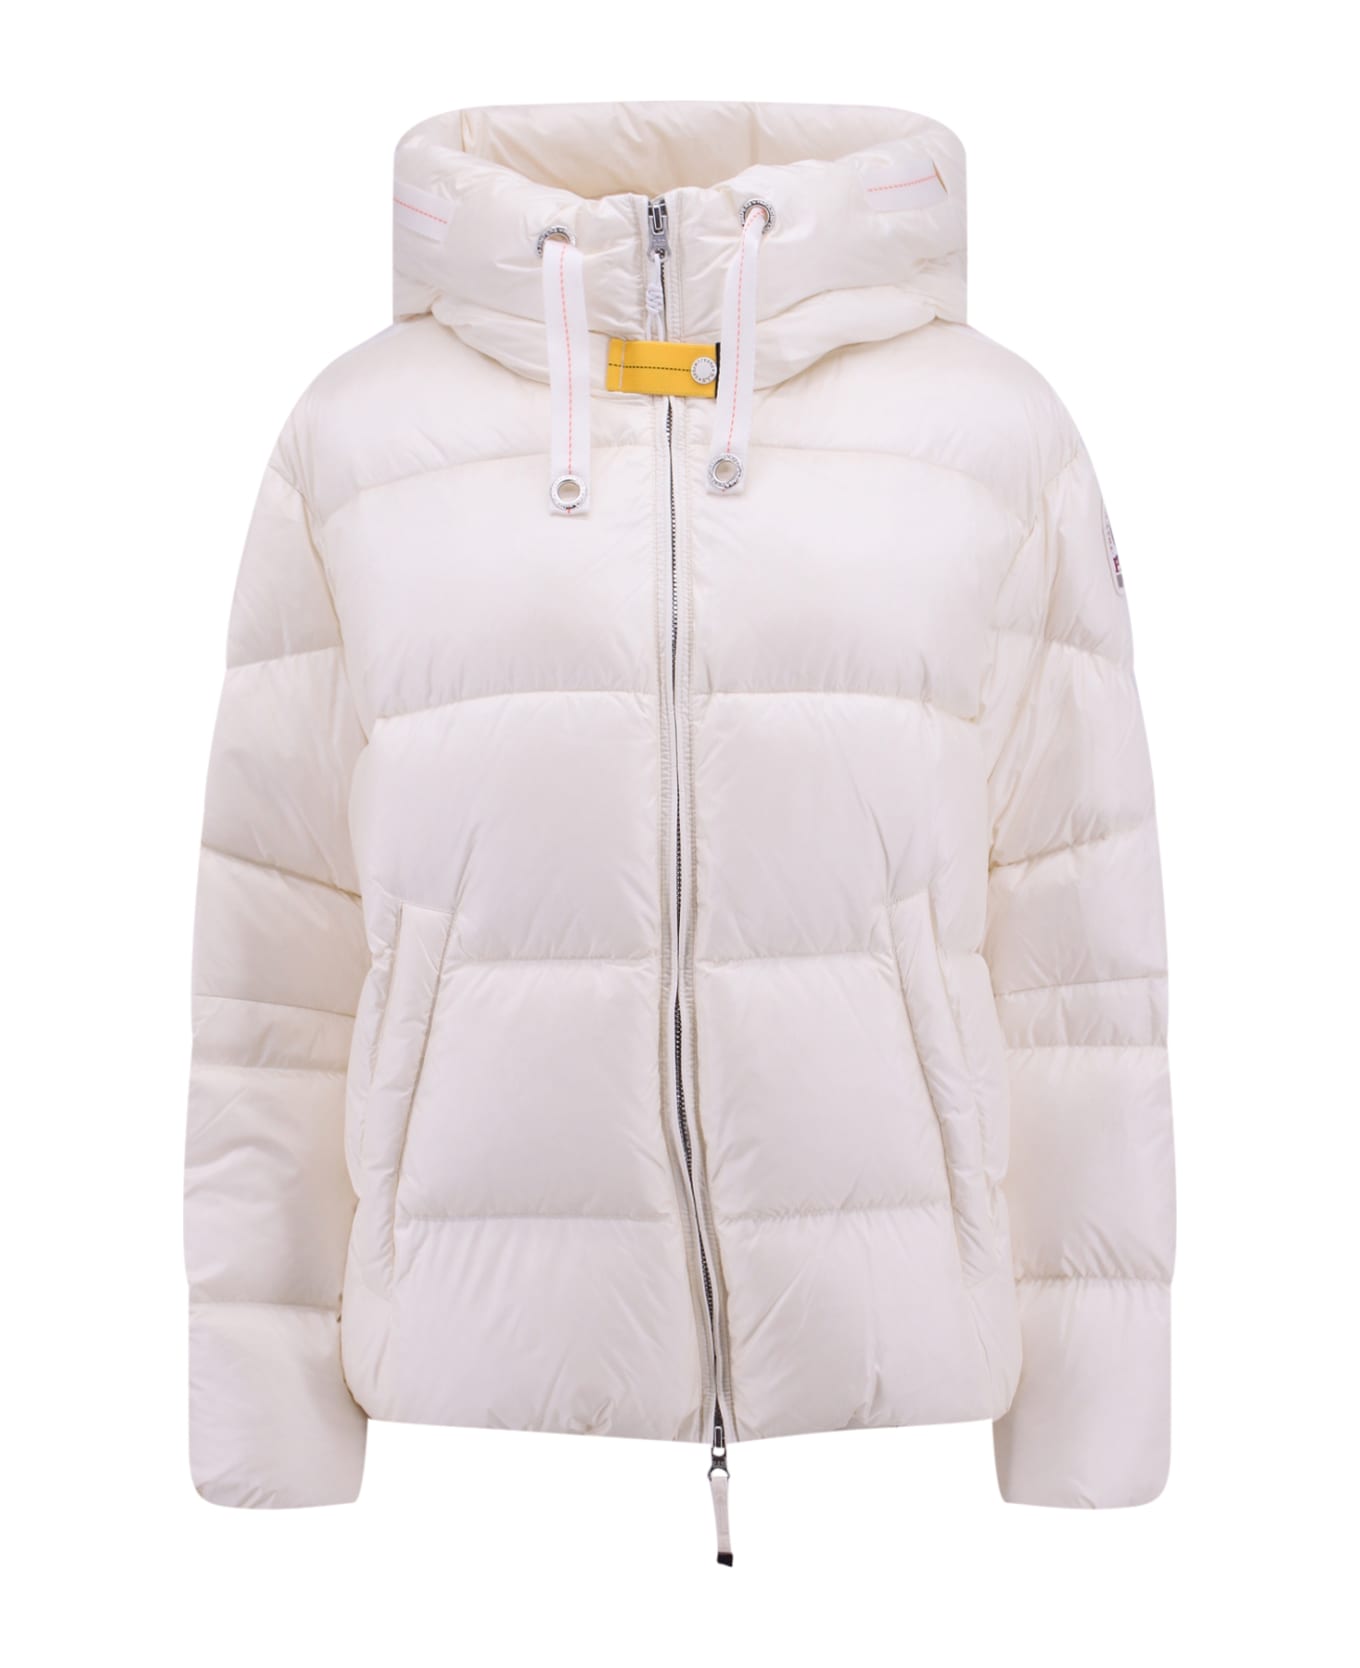 Parajumpers Tilly Jacket - White ダウンジャケット